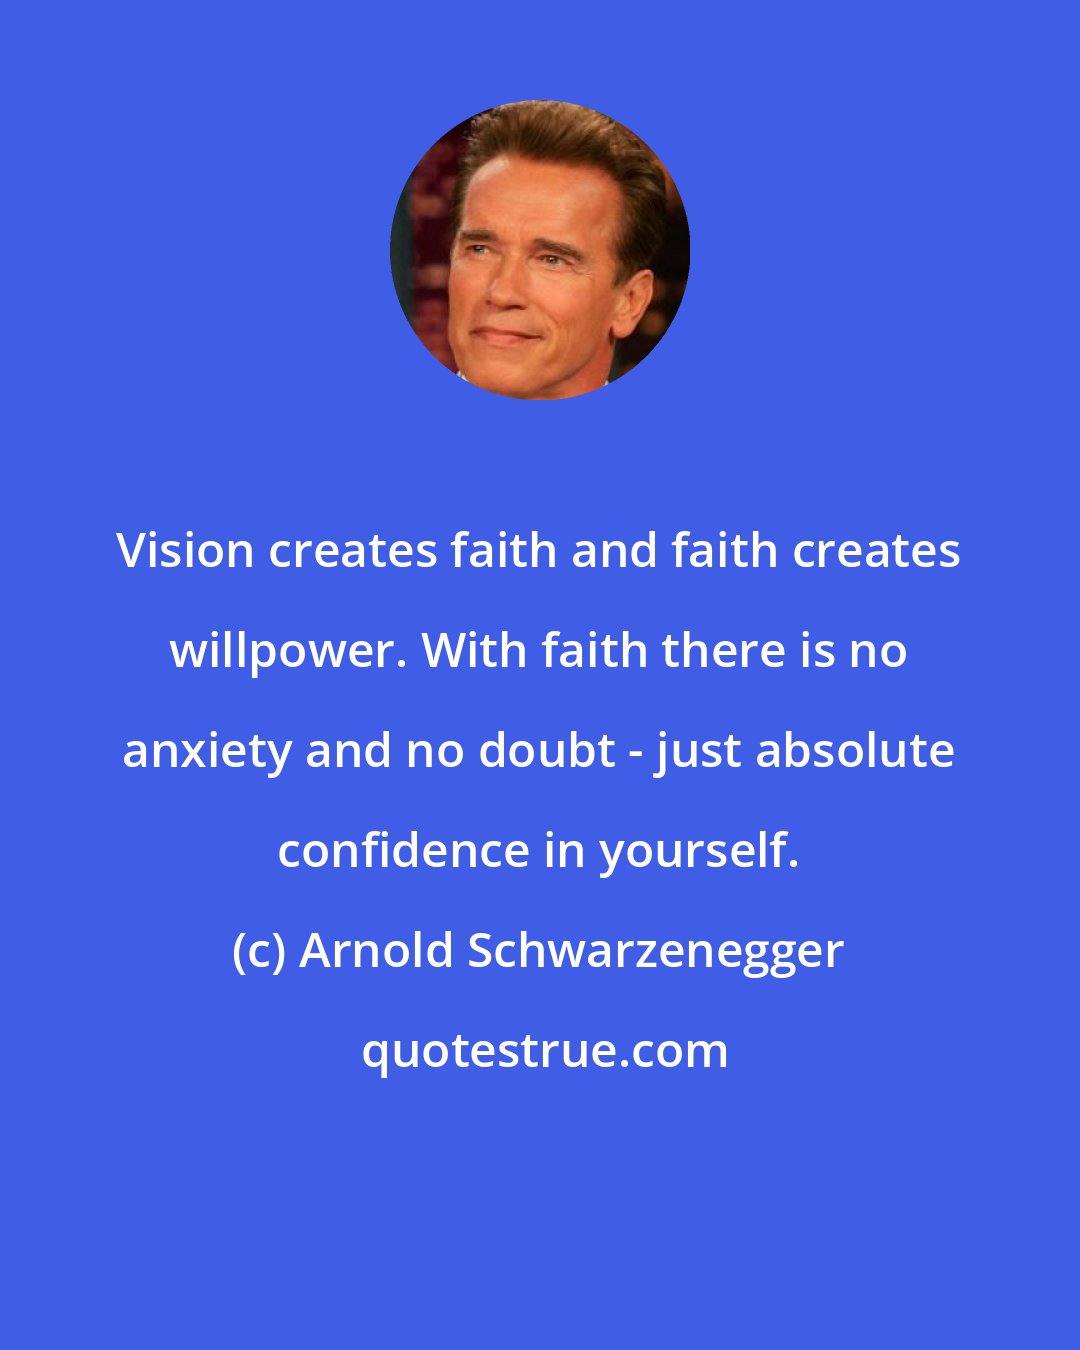 Arnold Schwarzenegger: Vision creates faith and faith creates willpower. With faith there is no anxiety and no doubt - just absolute confidence in yourself.